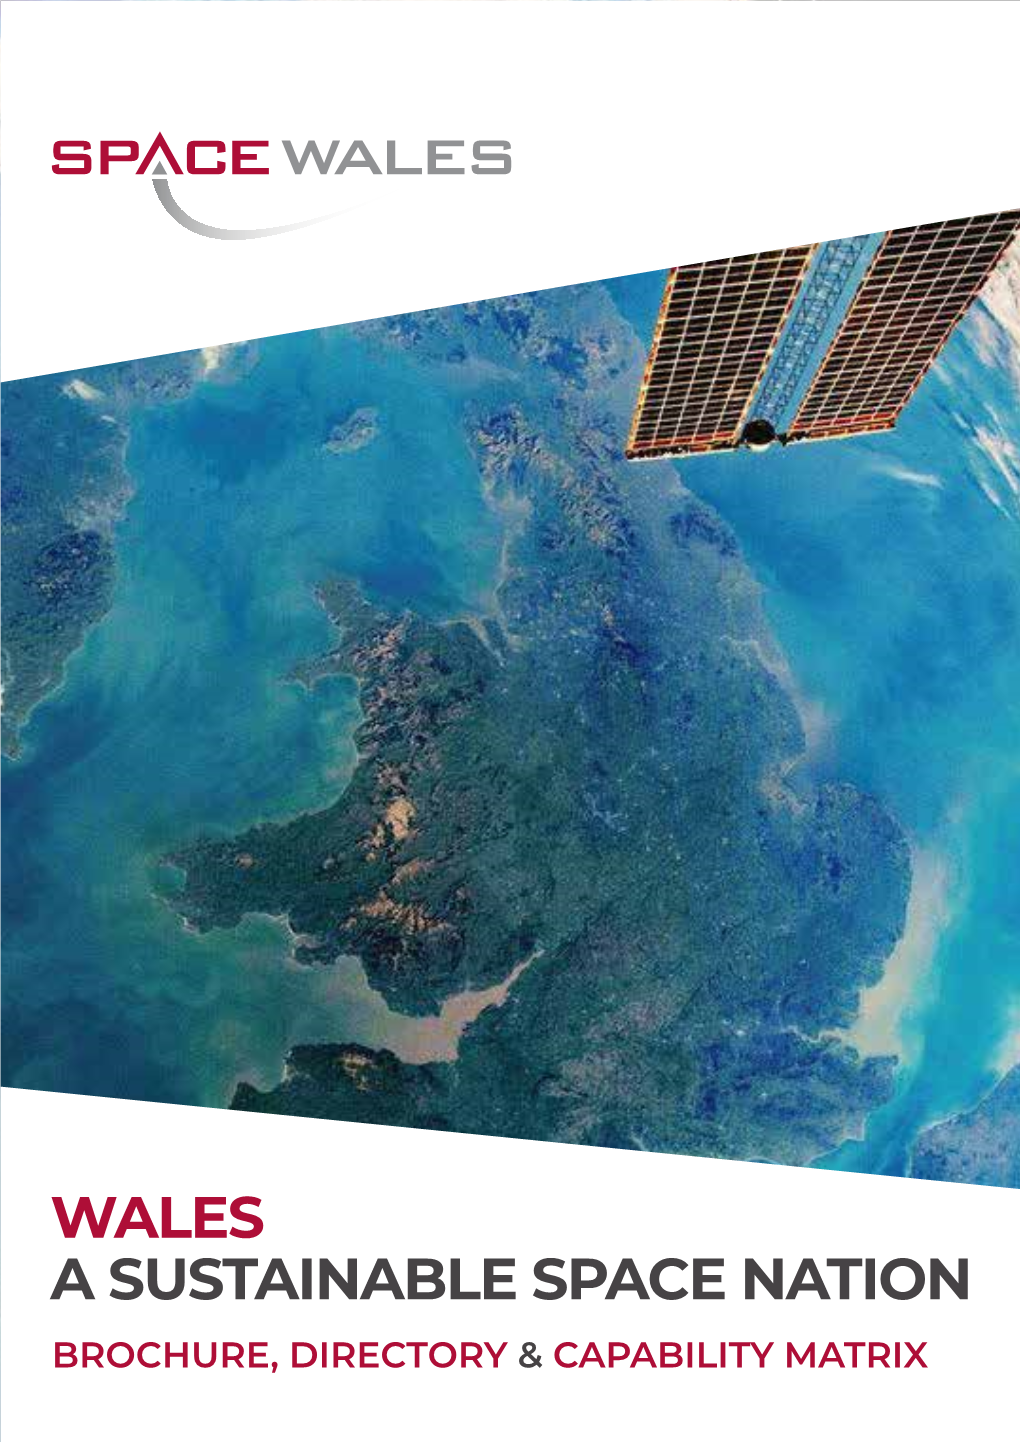 Space Wales Brochure Directory Capability Matrix (Lowres)